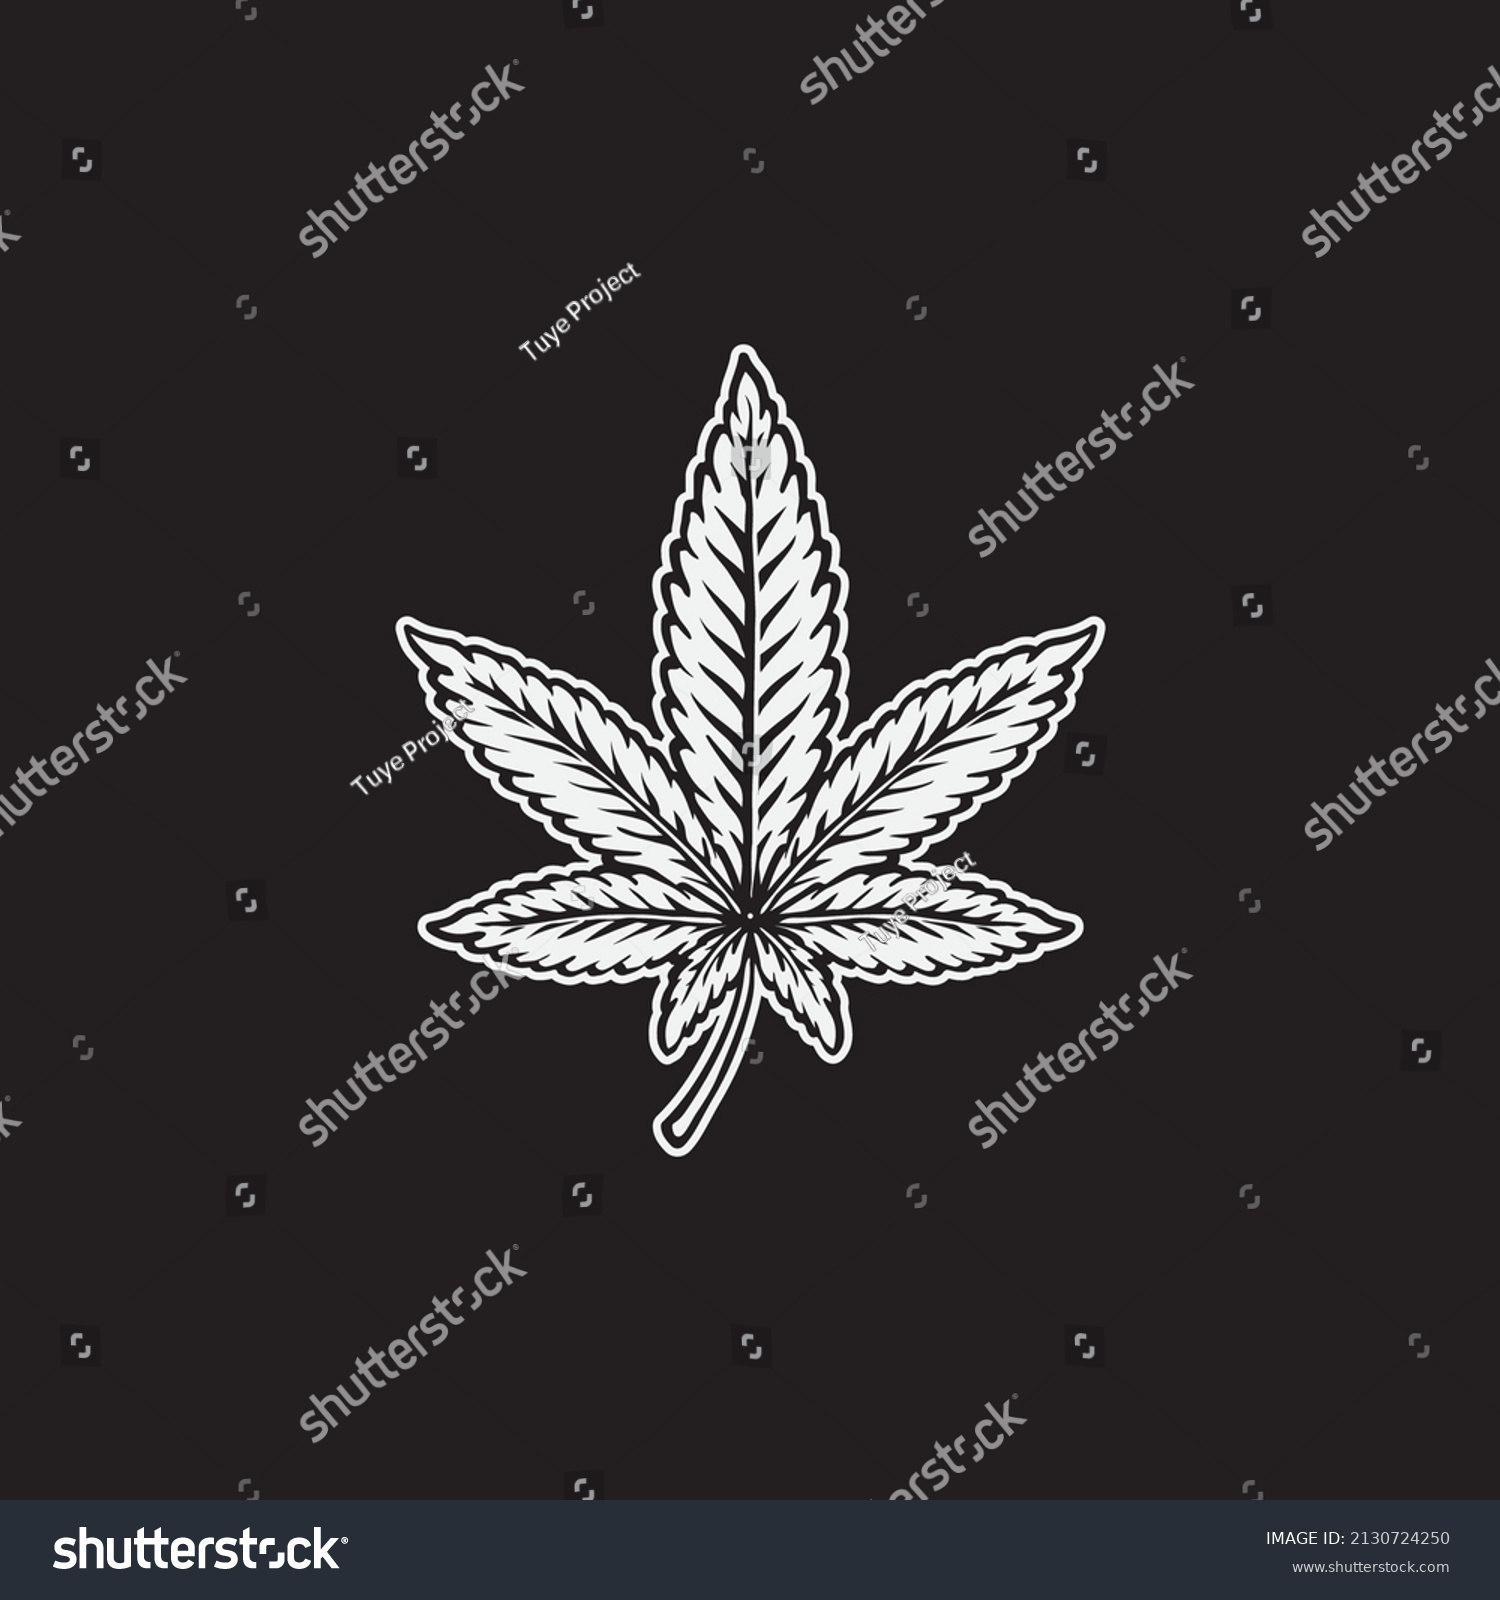 Cannabis Leaf Drawing Vector Illustration Stock Vector (Royalty Free ...